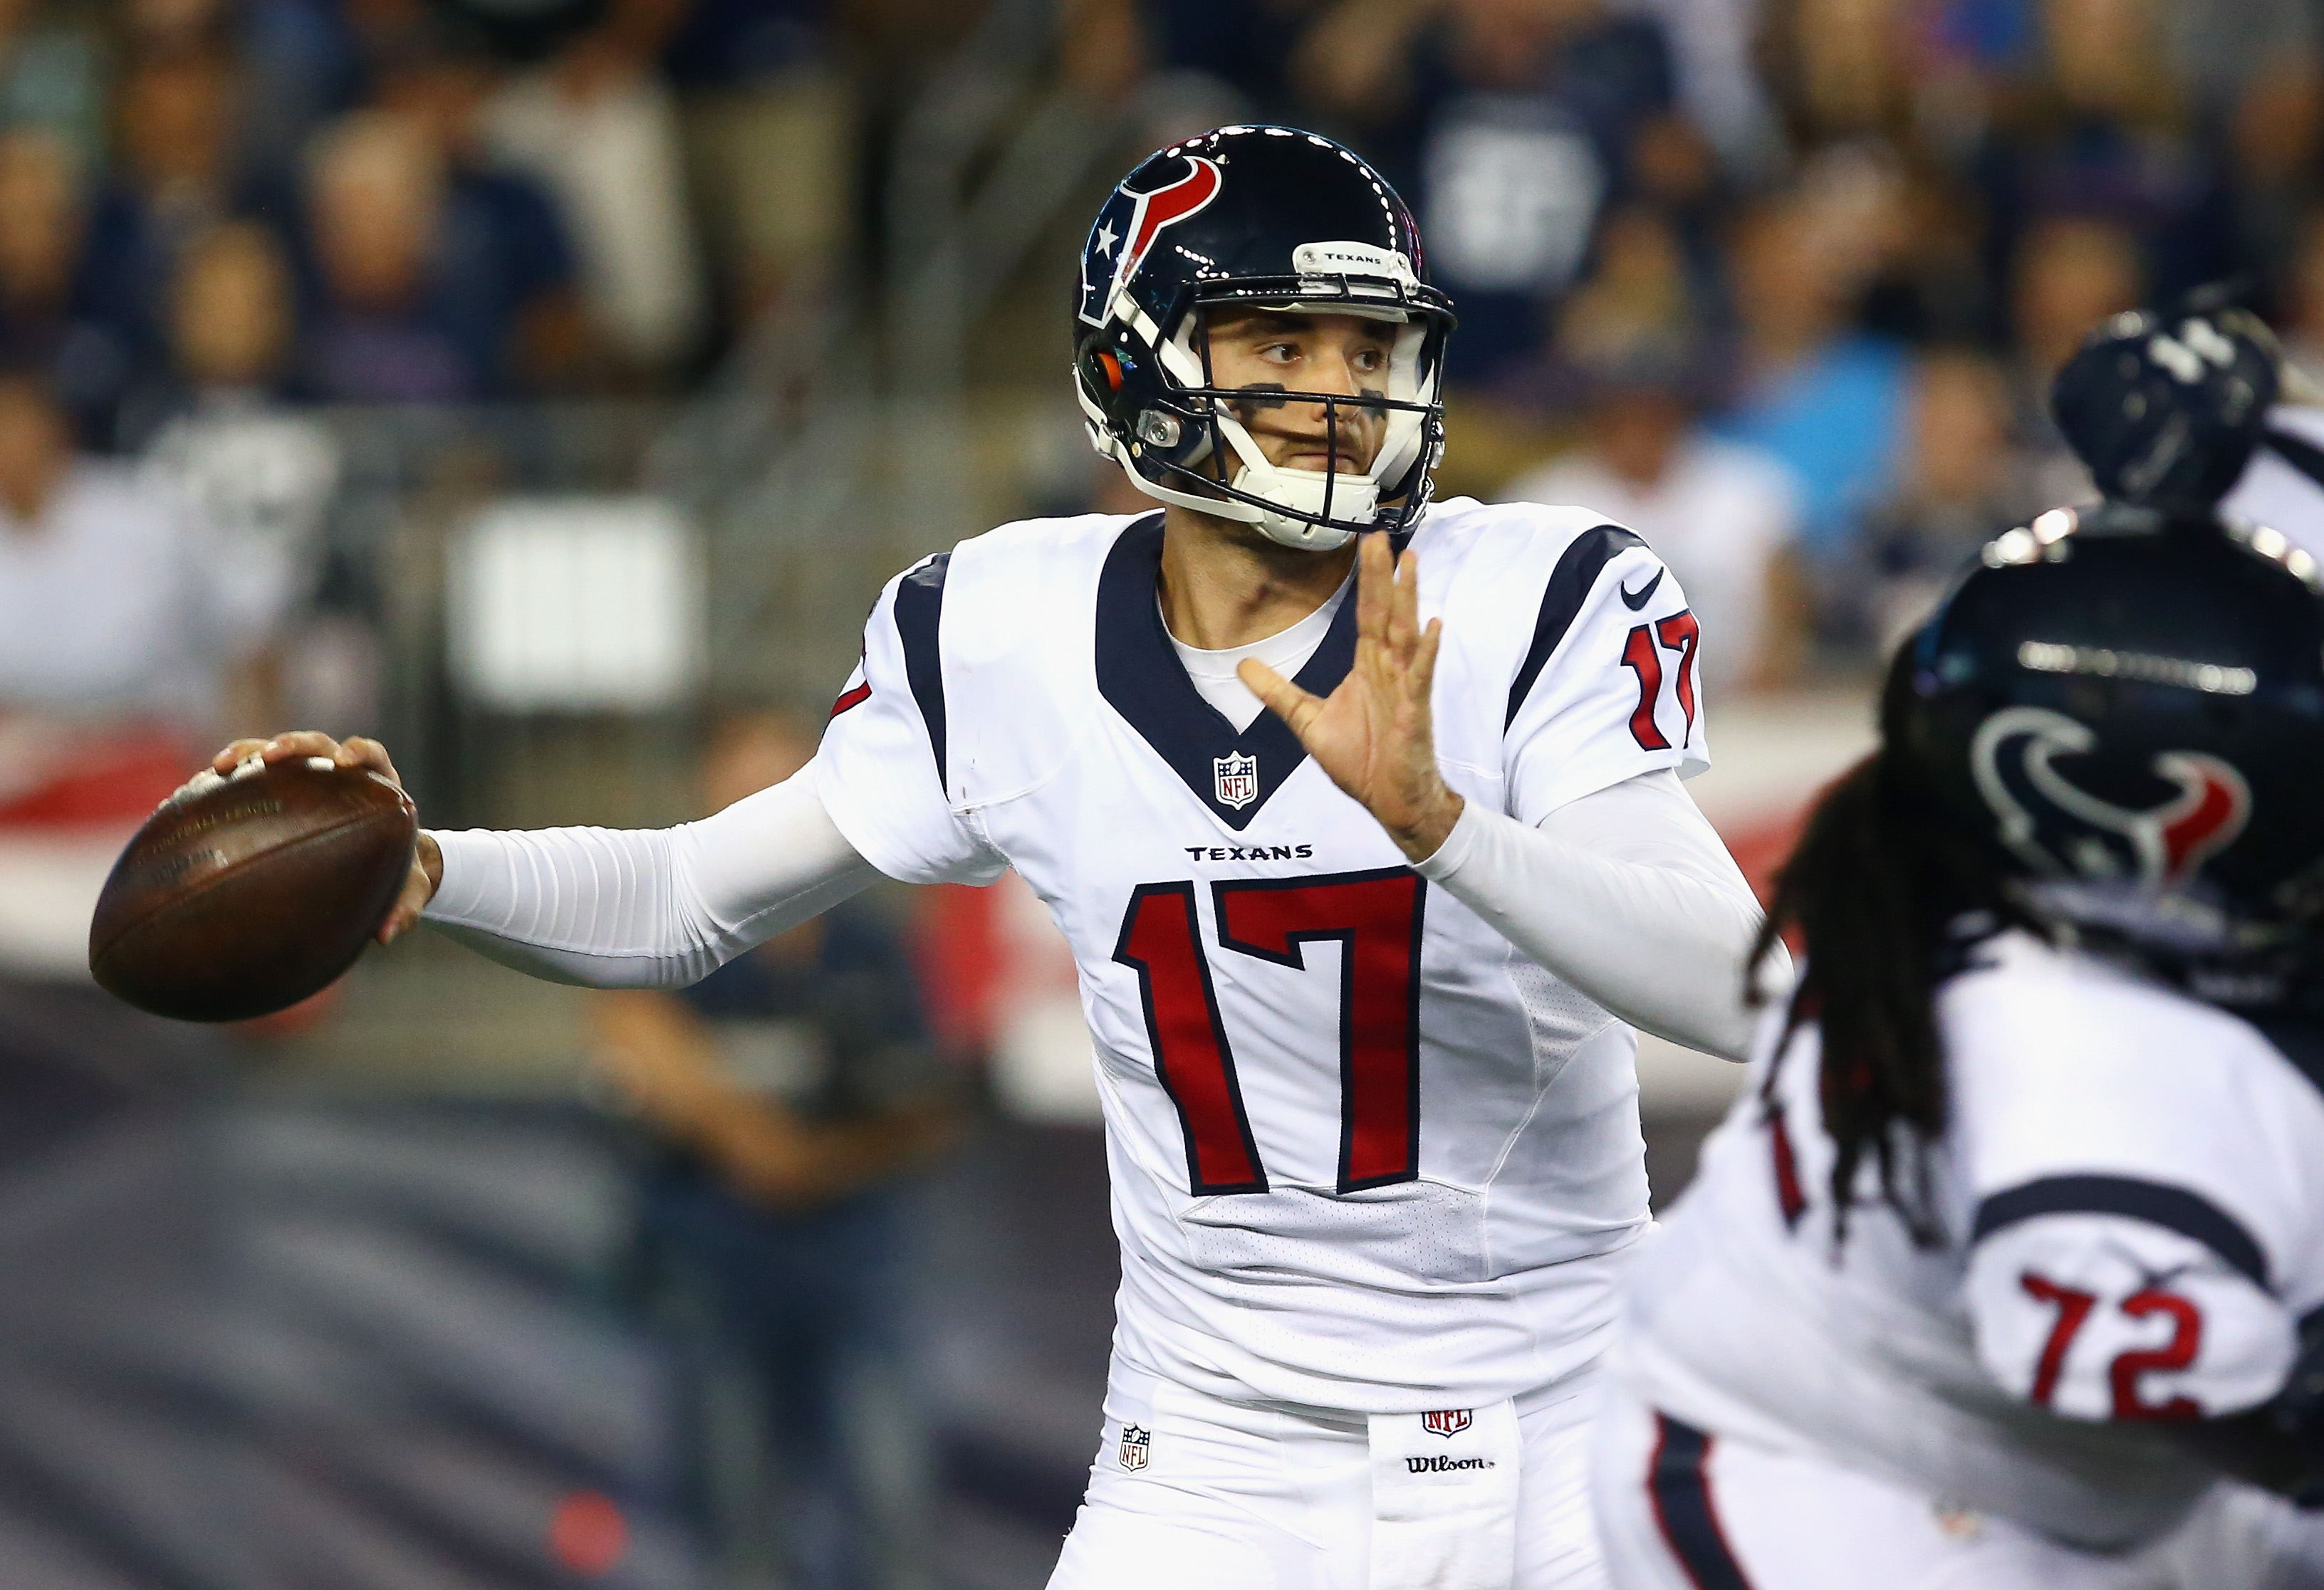 Titans vs. Texans Live Stream: How to Watch Online